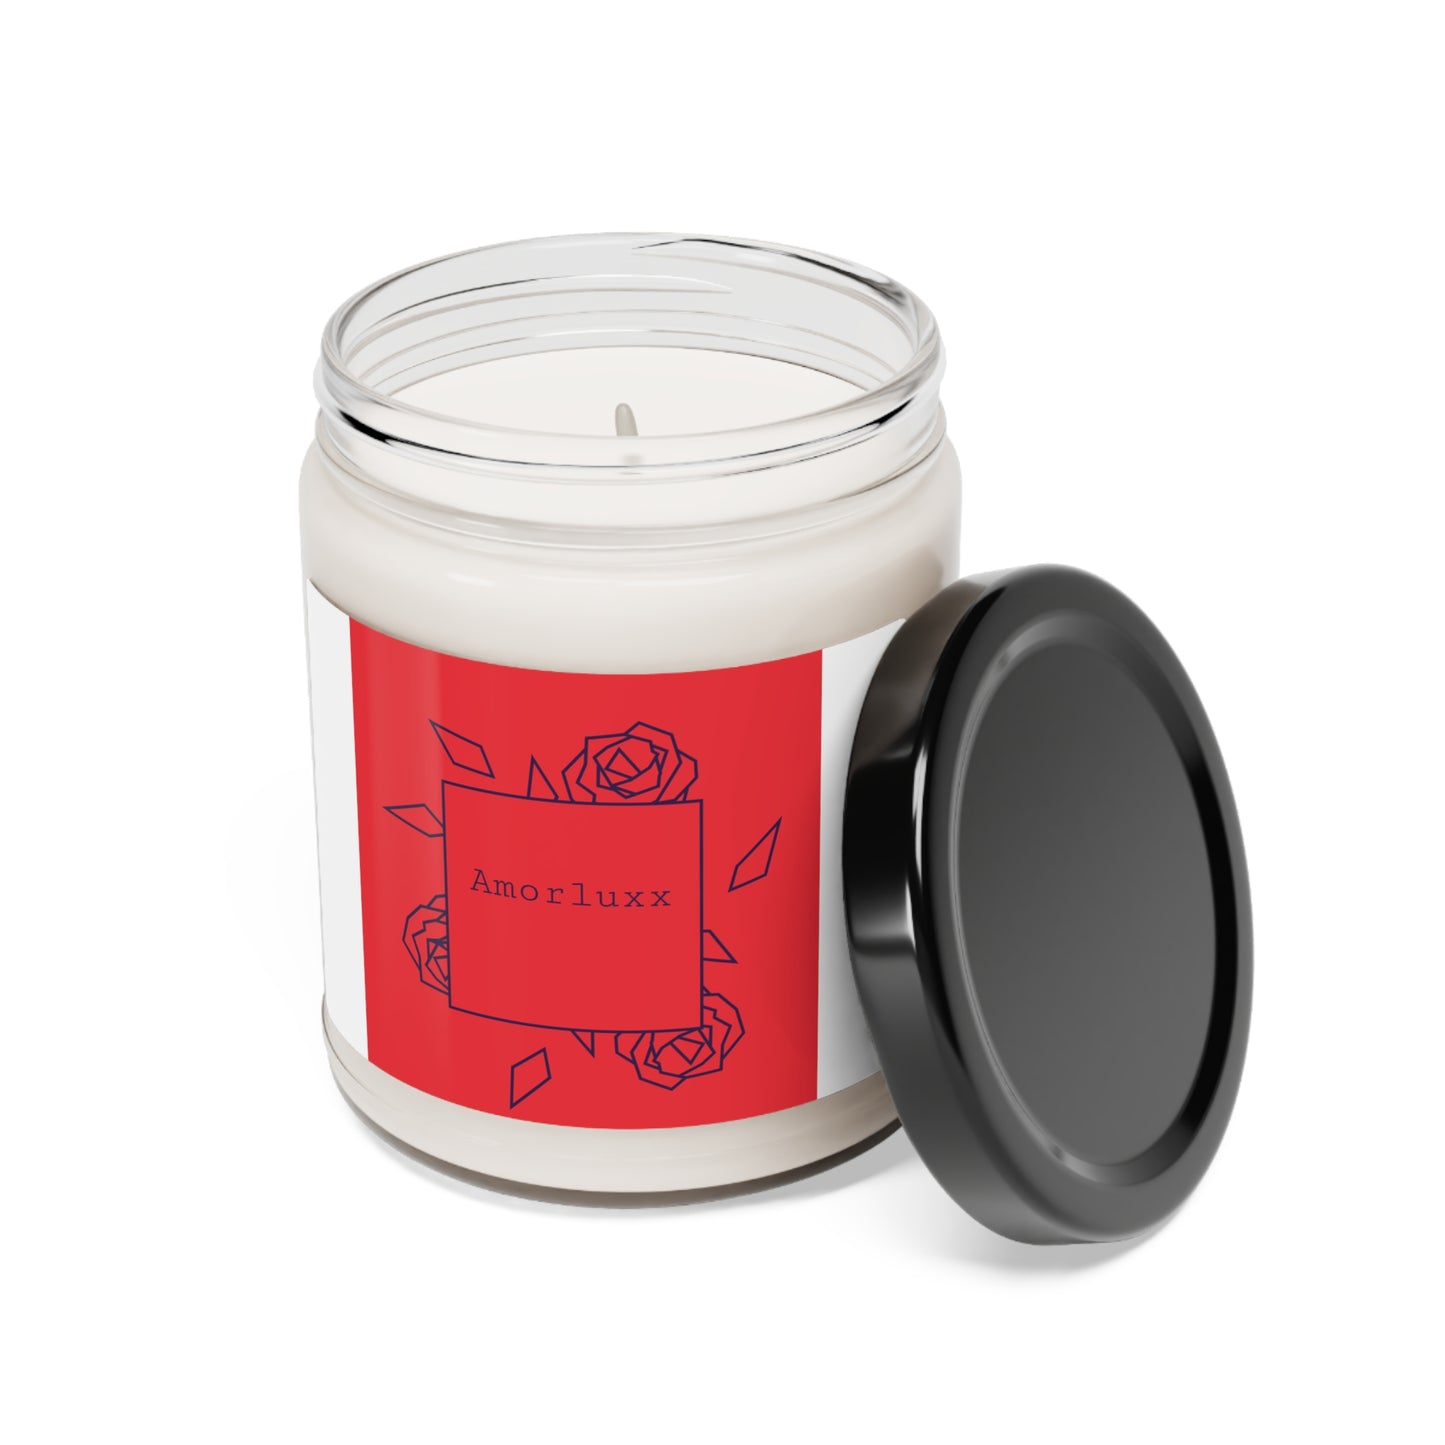 Amorluxx Scented Soy Candle, 9oz